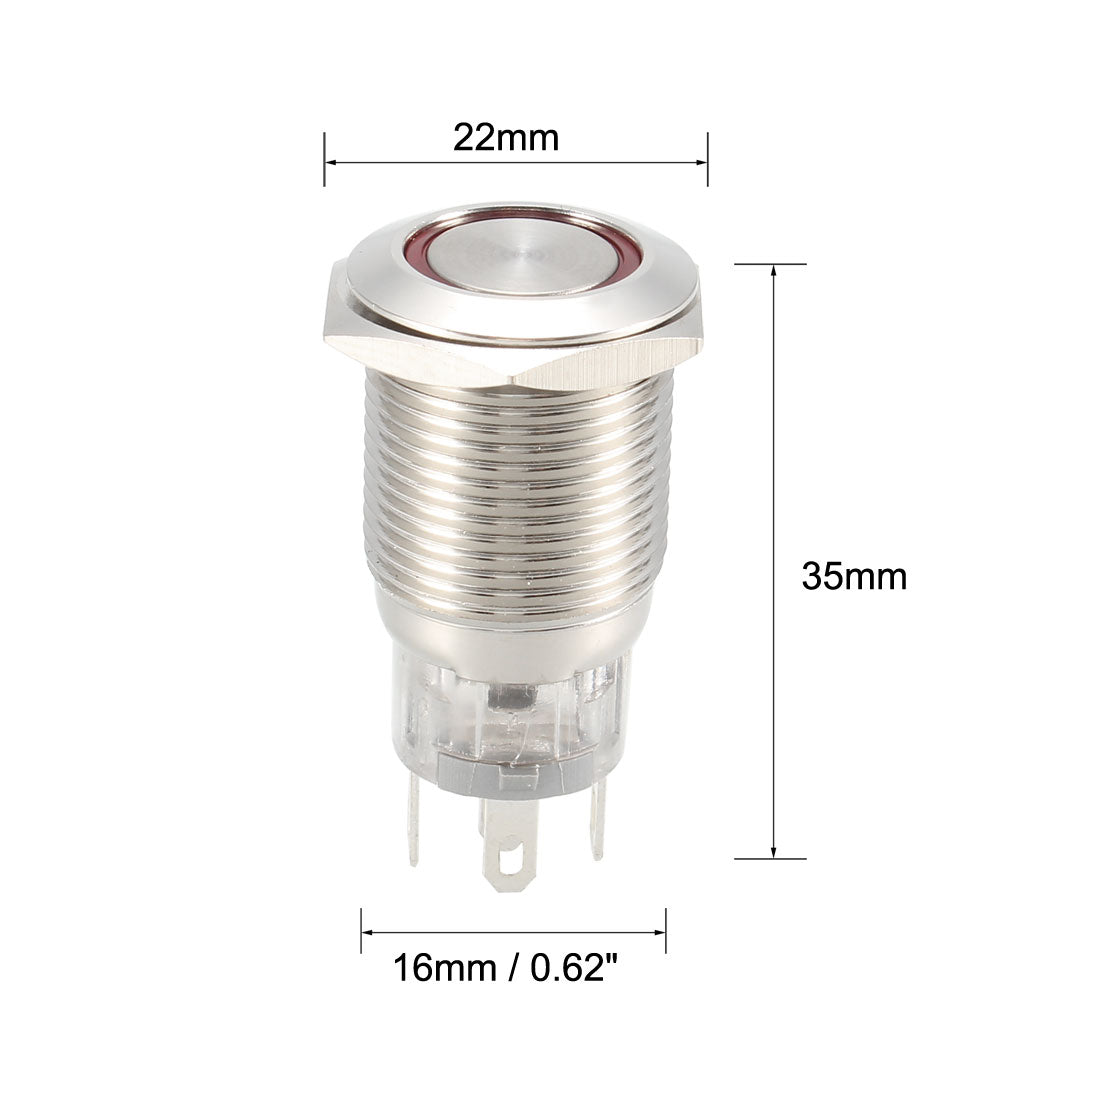 uxcell Uxcell Momentary Push Button Switch 16mm Mounting 1NC NO COM 12V LED with Socket Plug